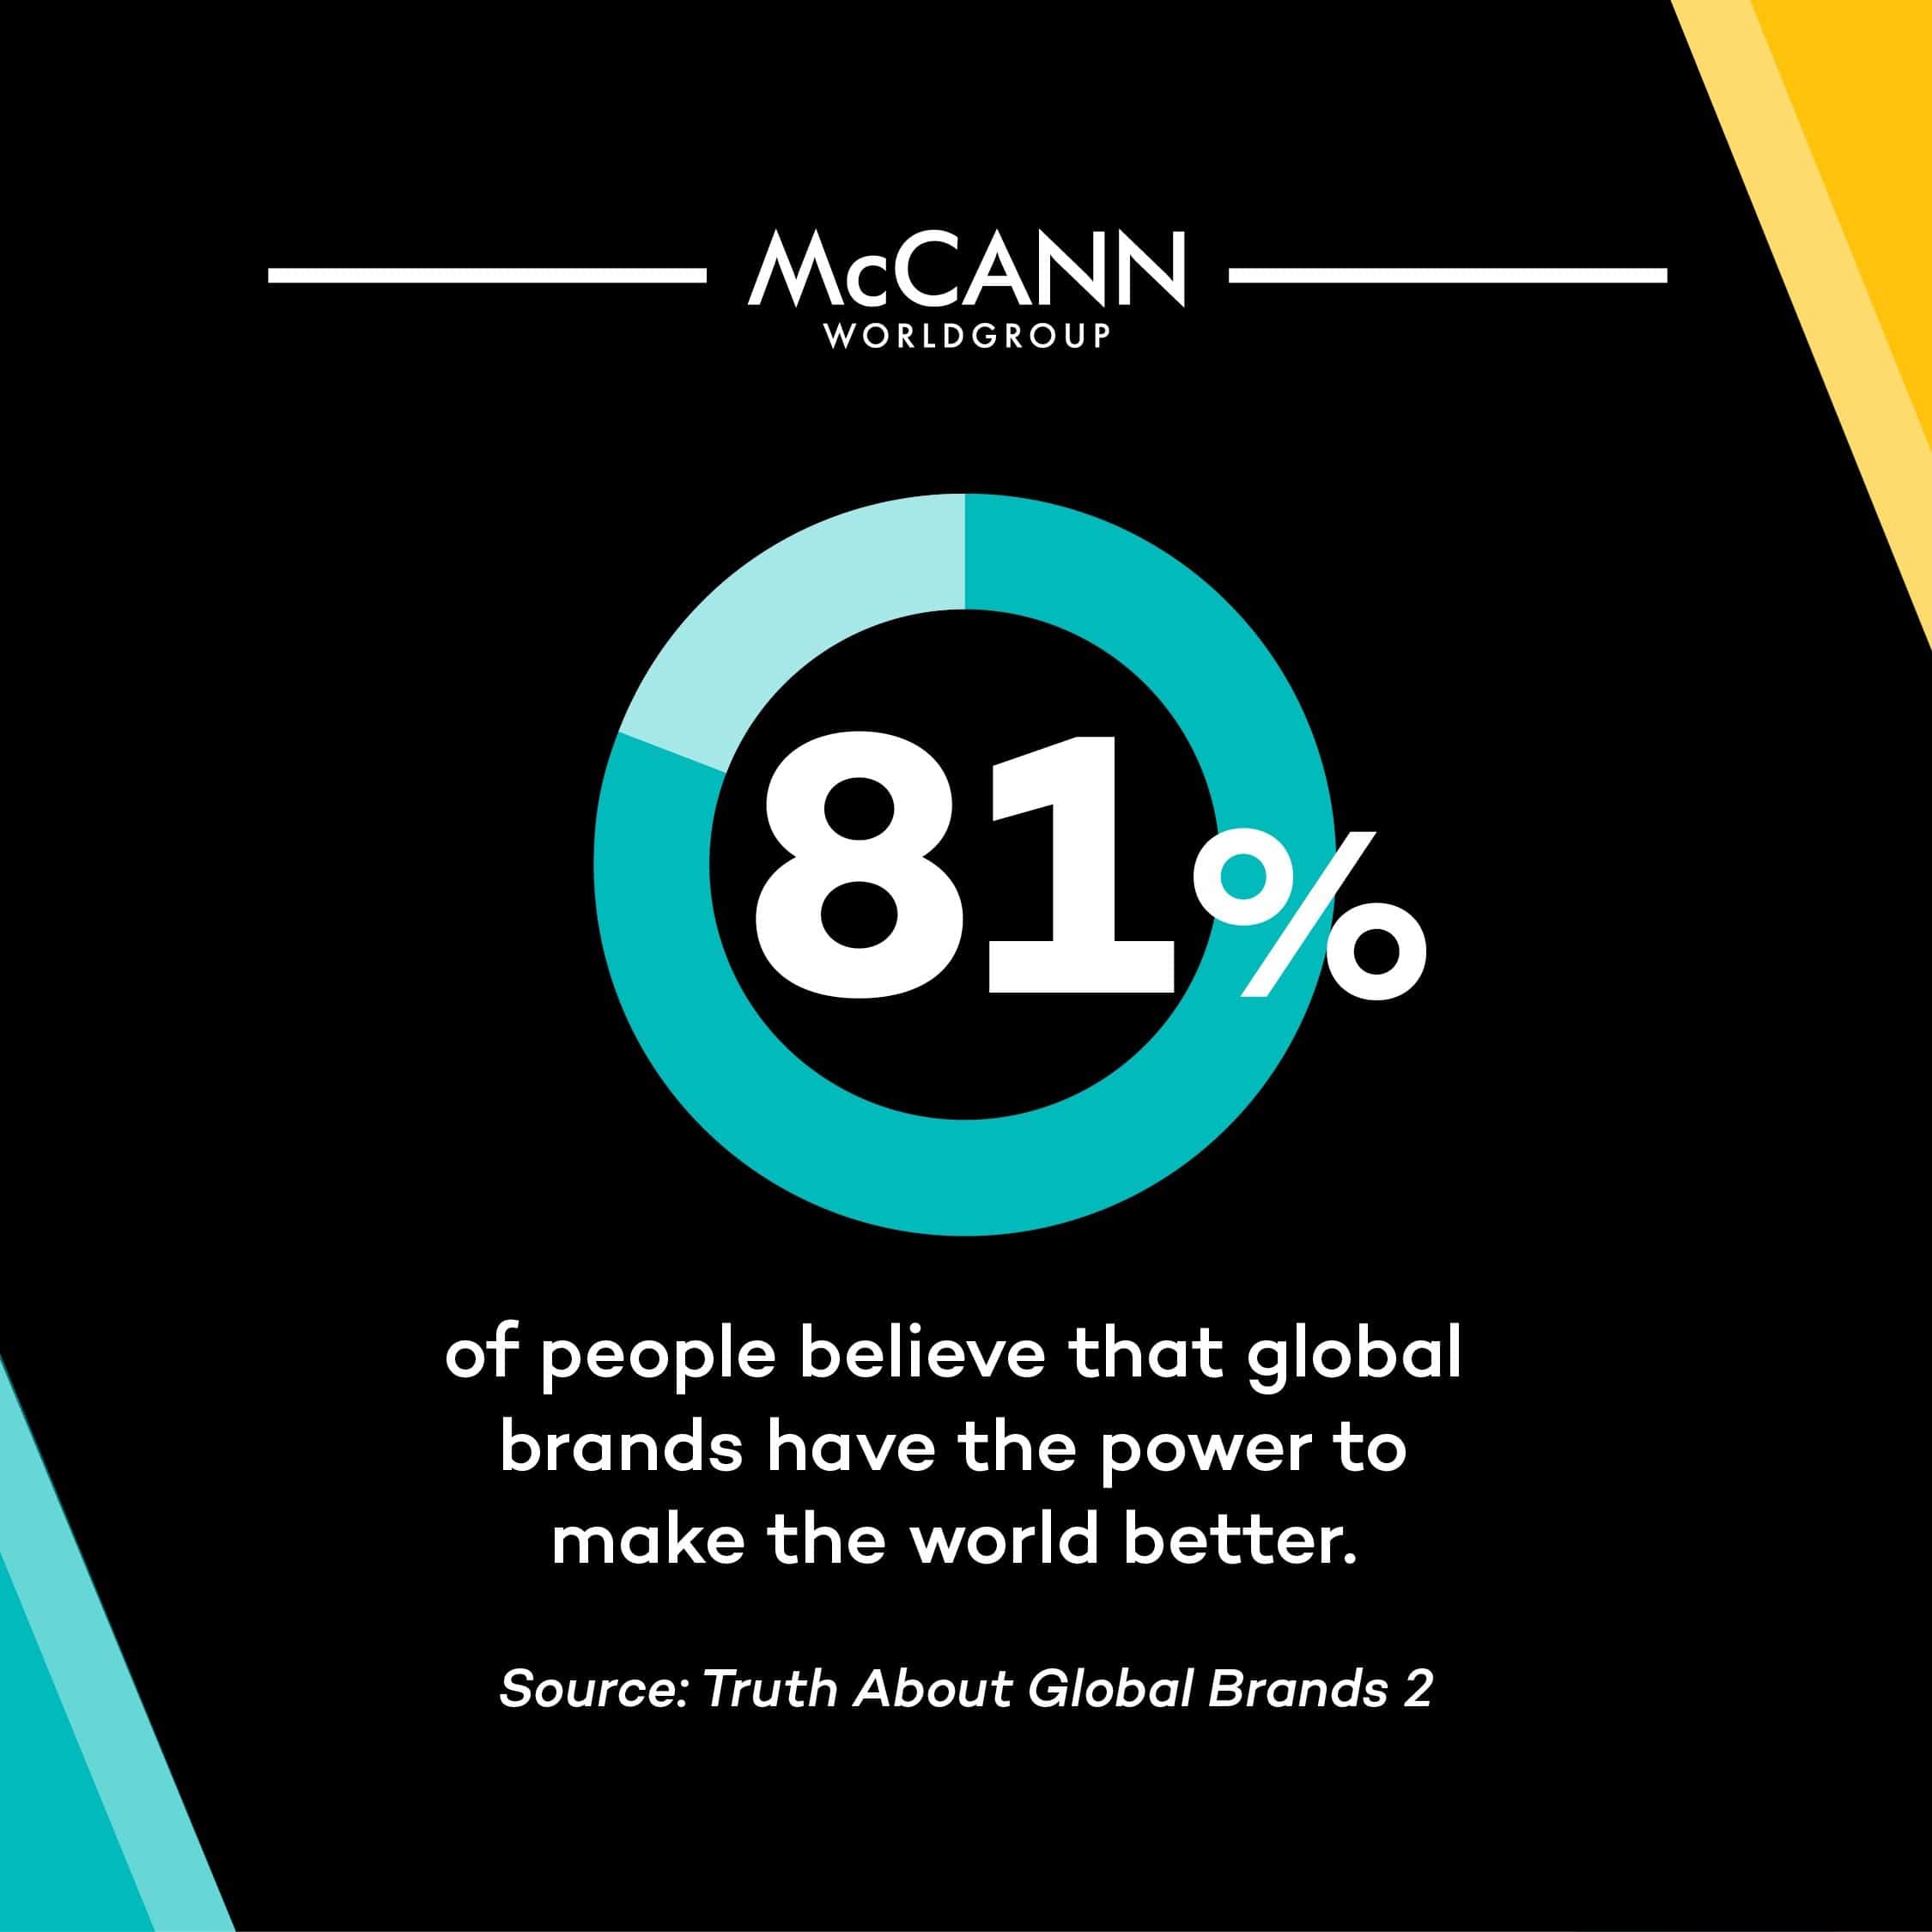 The truth about global brands—political pessimism making brands more powerful